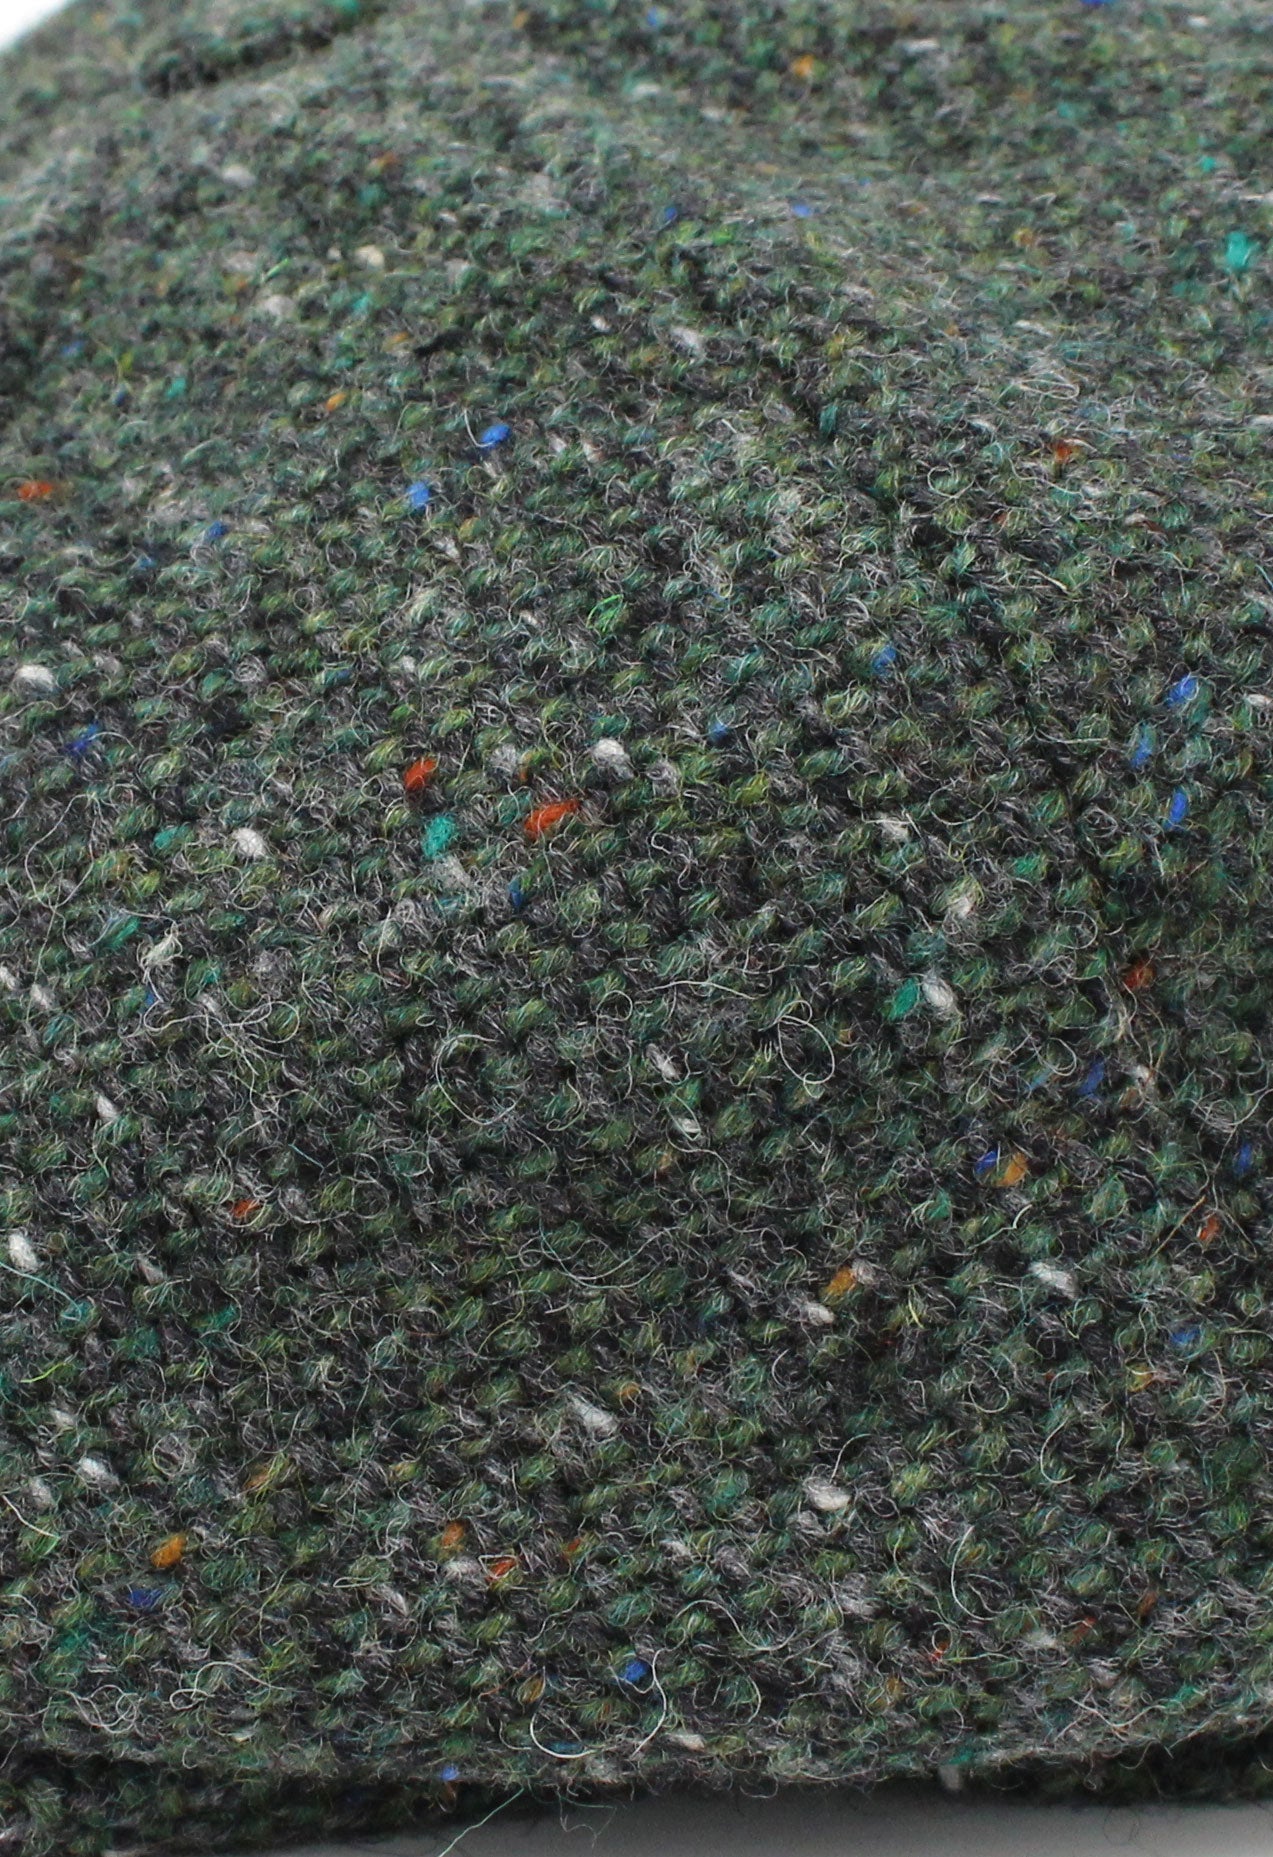 Colour; Green Salt and Pepper tweed swatch